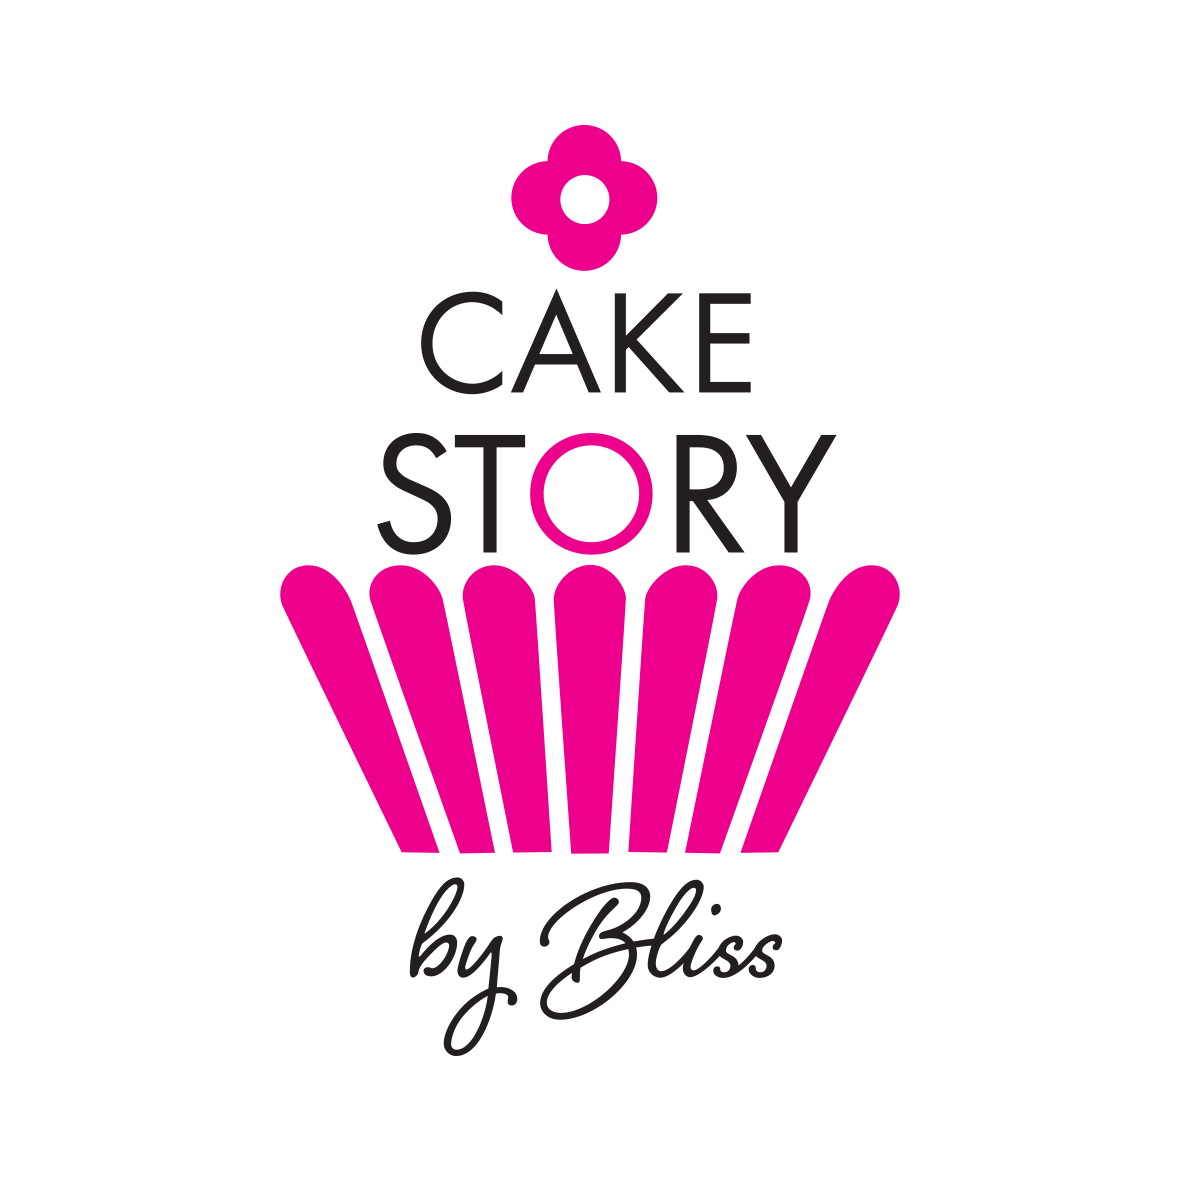 Cake Story by Bliss